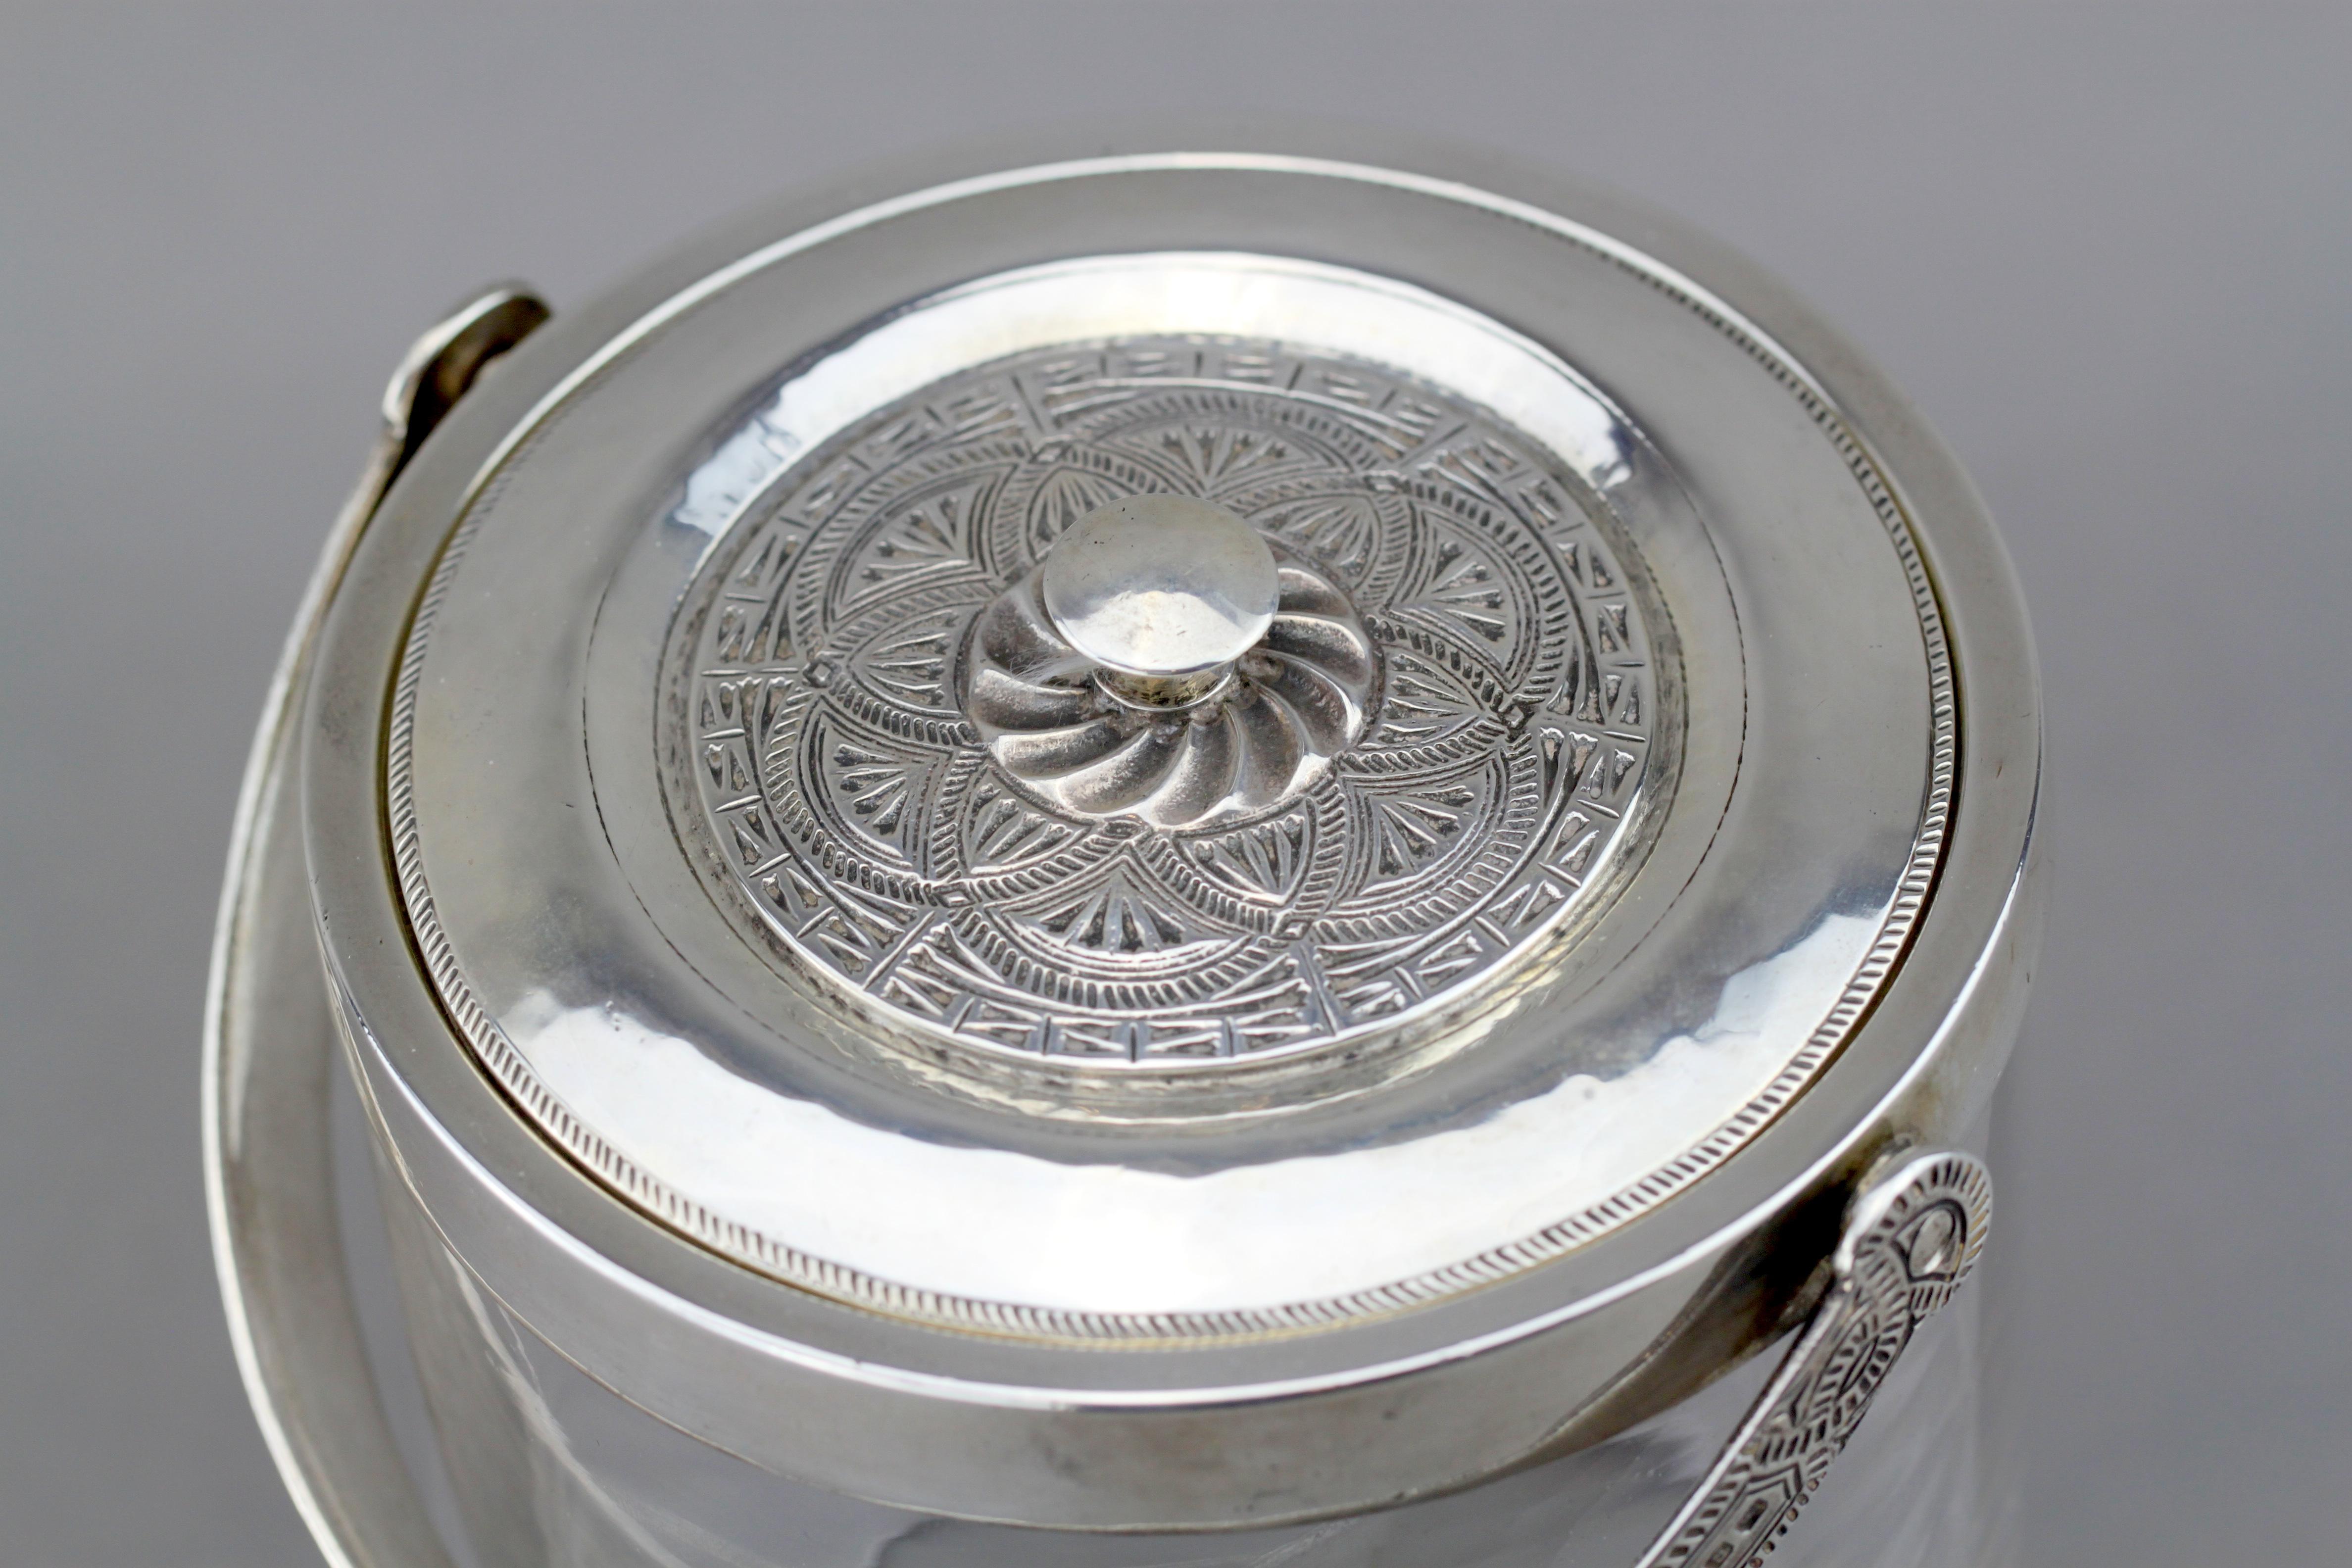 A sterling silver and glass ice bucket
Maker: Liberty & Co
Made in Birmingham 1917
Fully hallmarked.

Dimensions:
Diameter x height 12.8 x 14.5 cm
Weight: 1006 grams.

Condition: Surface wear and tear from general usage, has some subtle age